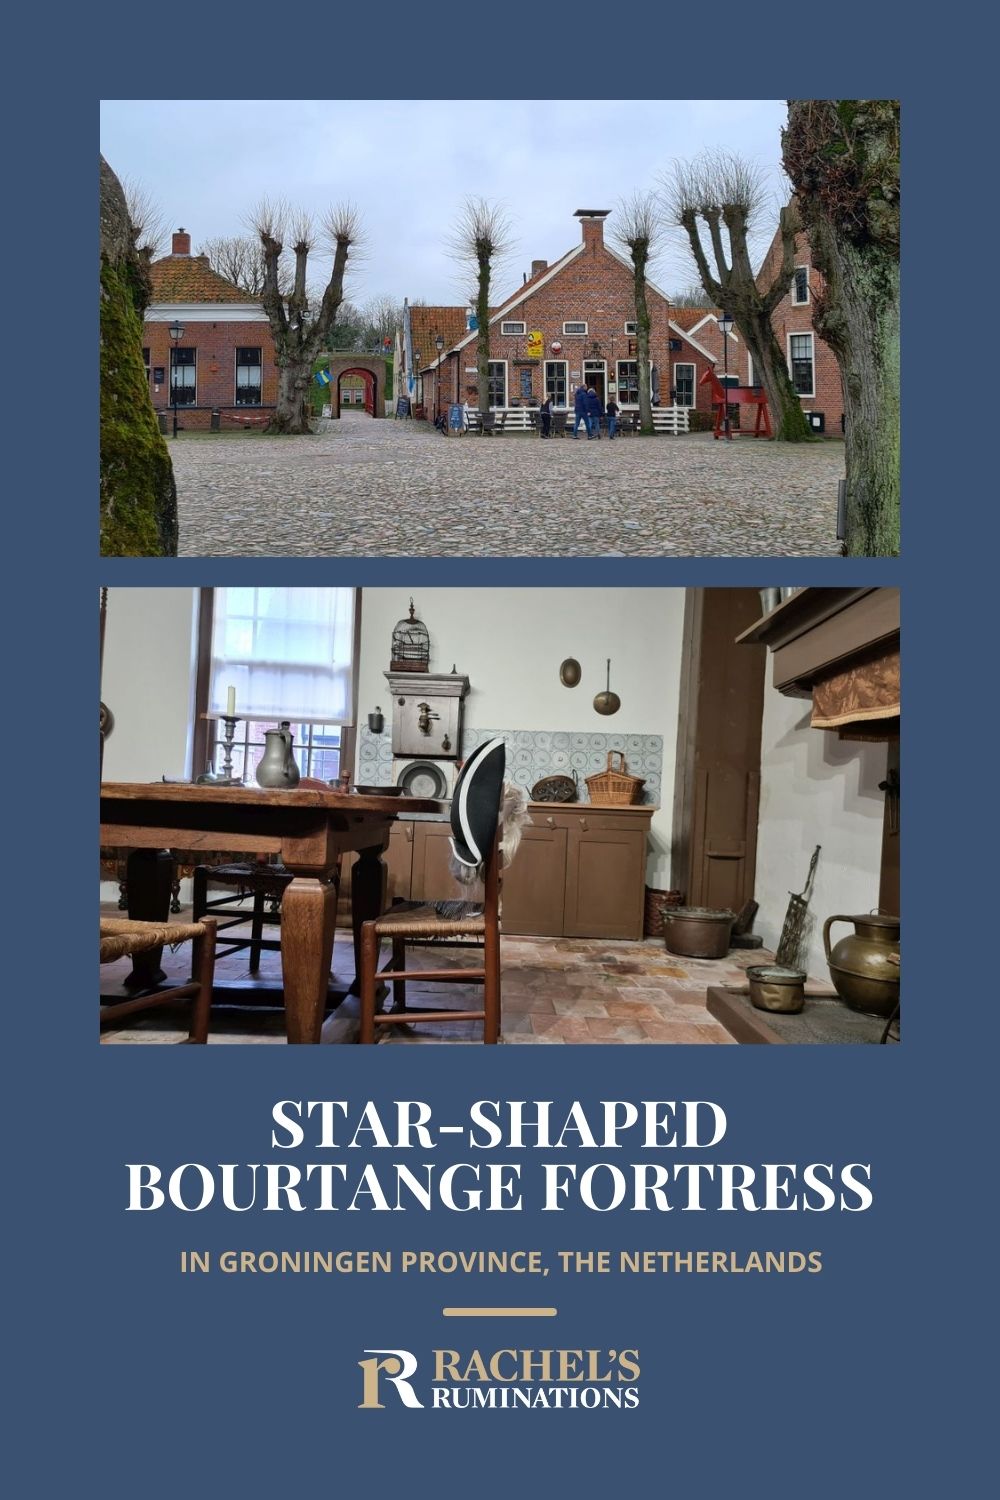 If you visit the east of the Netherlands, do not miss Bourtange, a charming village inside a star-shaped fortress. via @rachelsruminations